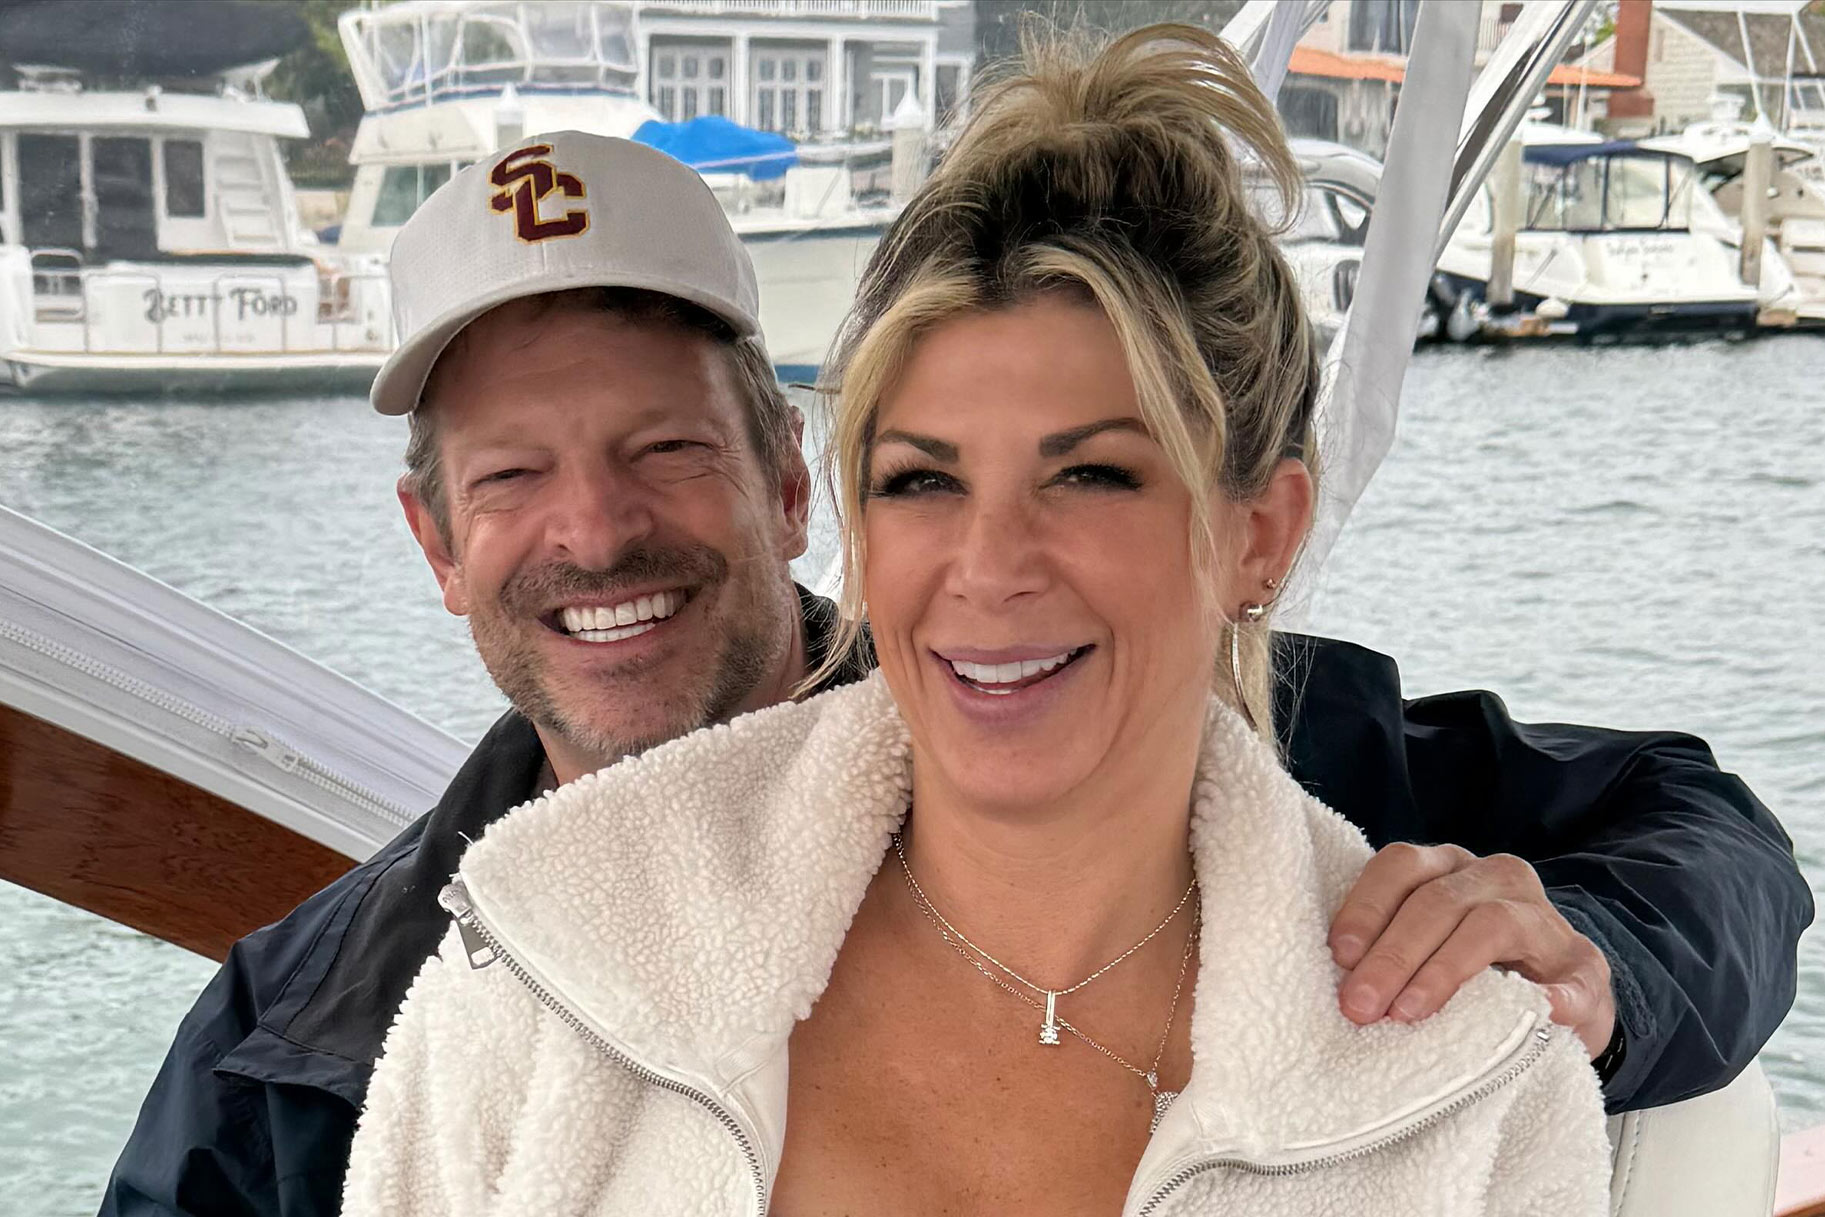 Alexis Bellino Says She and John Janssen Are “Meant to Be” During Romantic Trip in England | Bravo TV Official Site